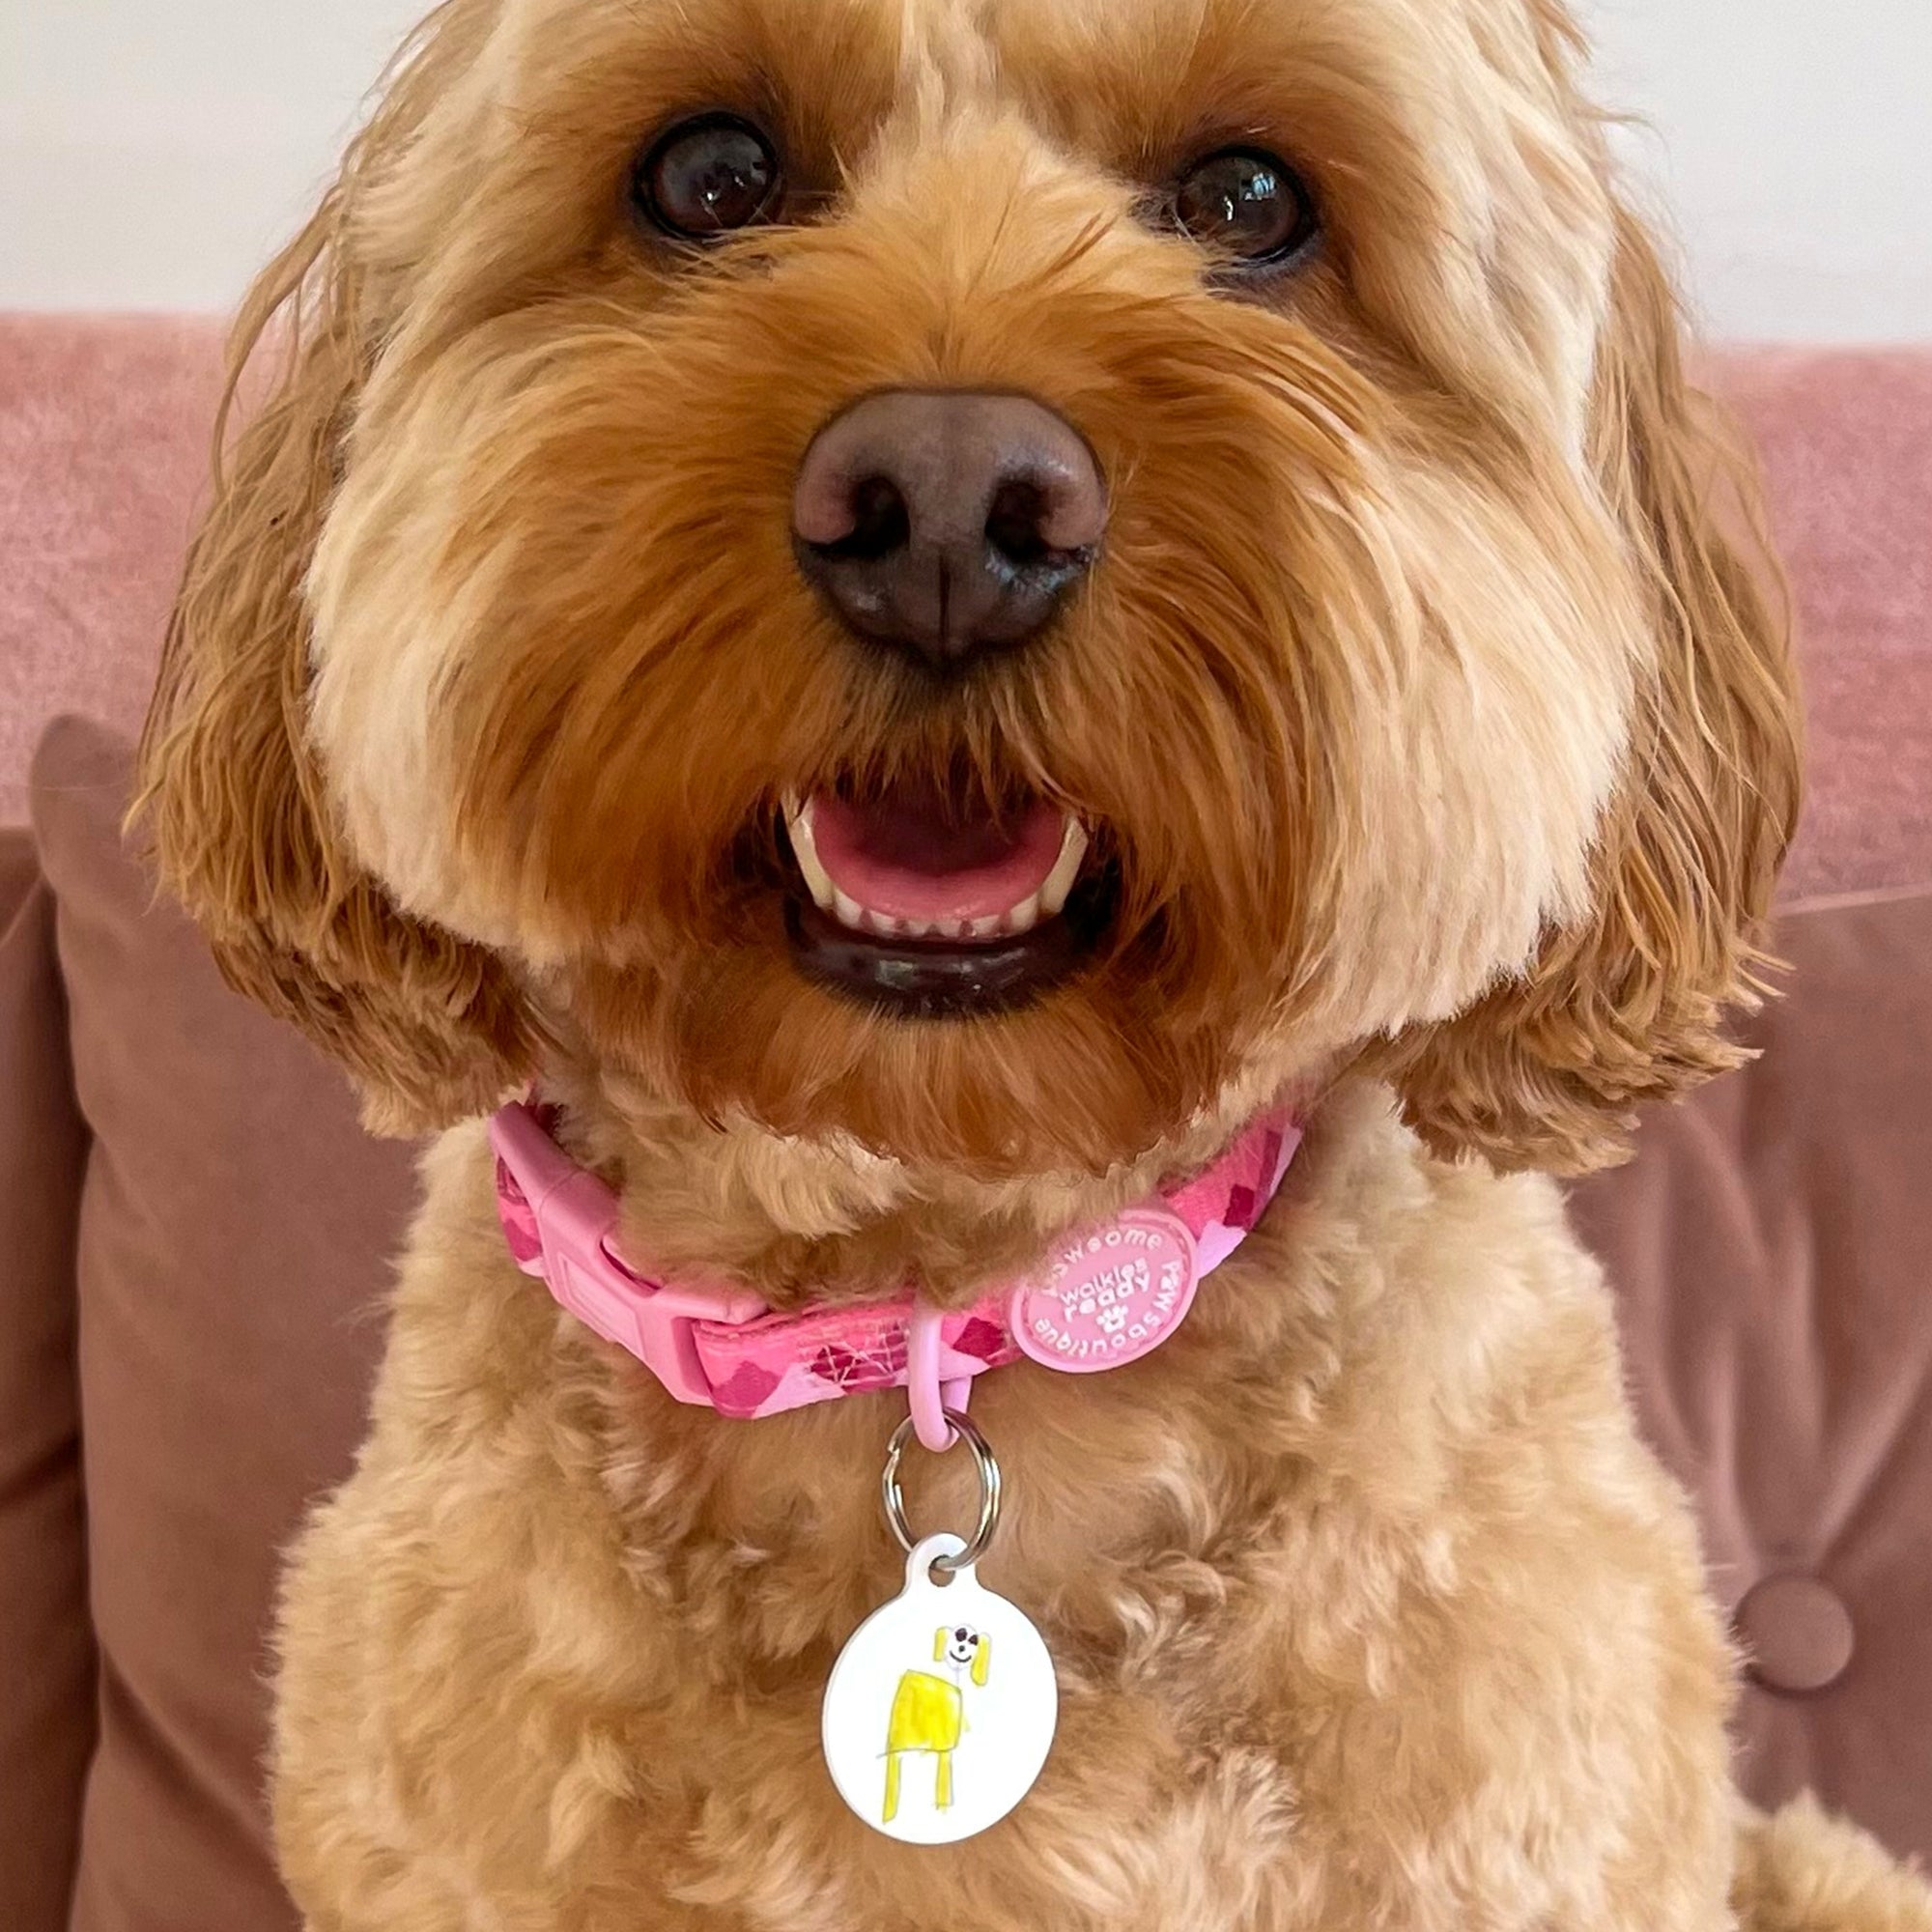 Pet tag - Designed by your child